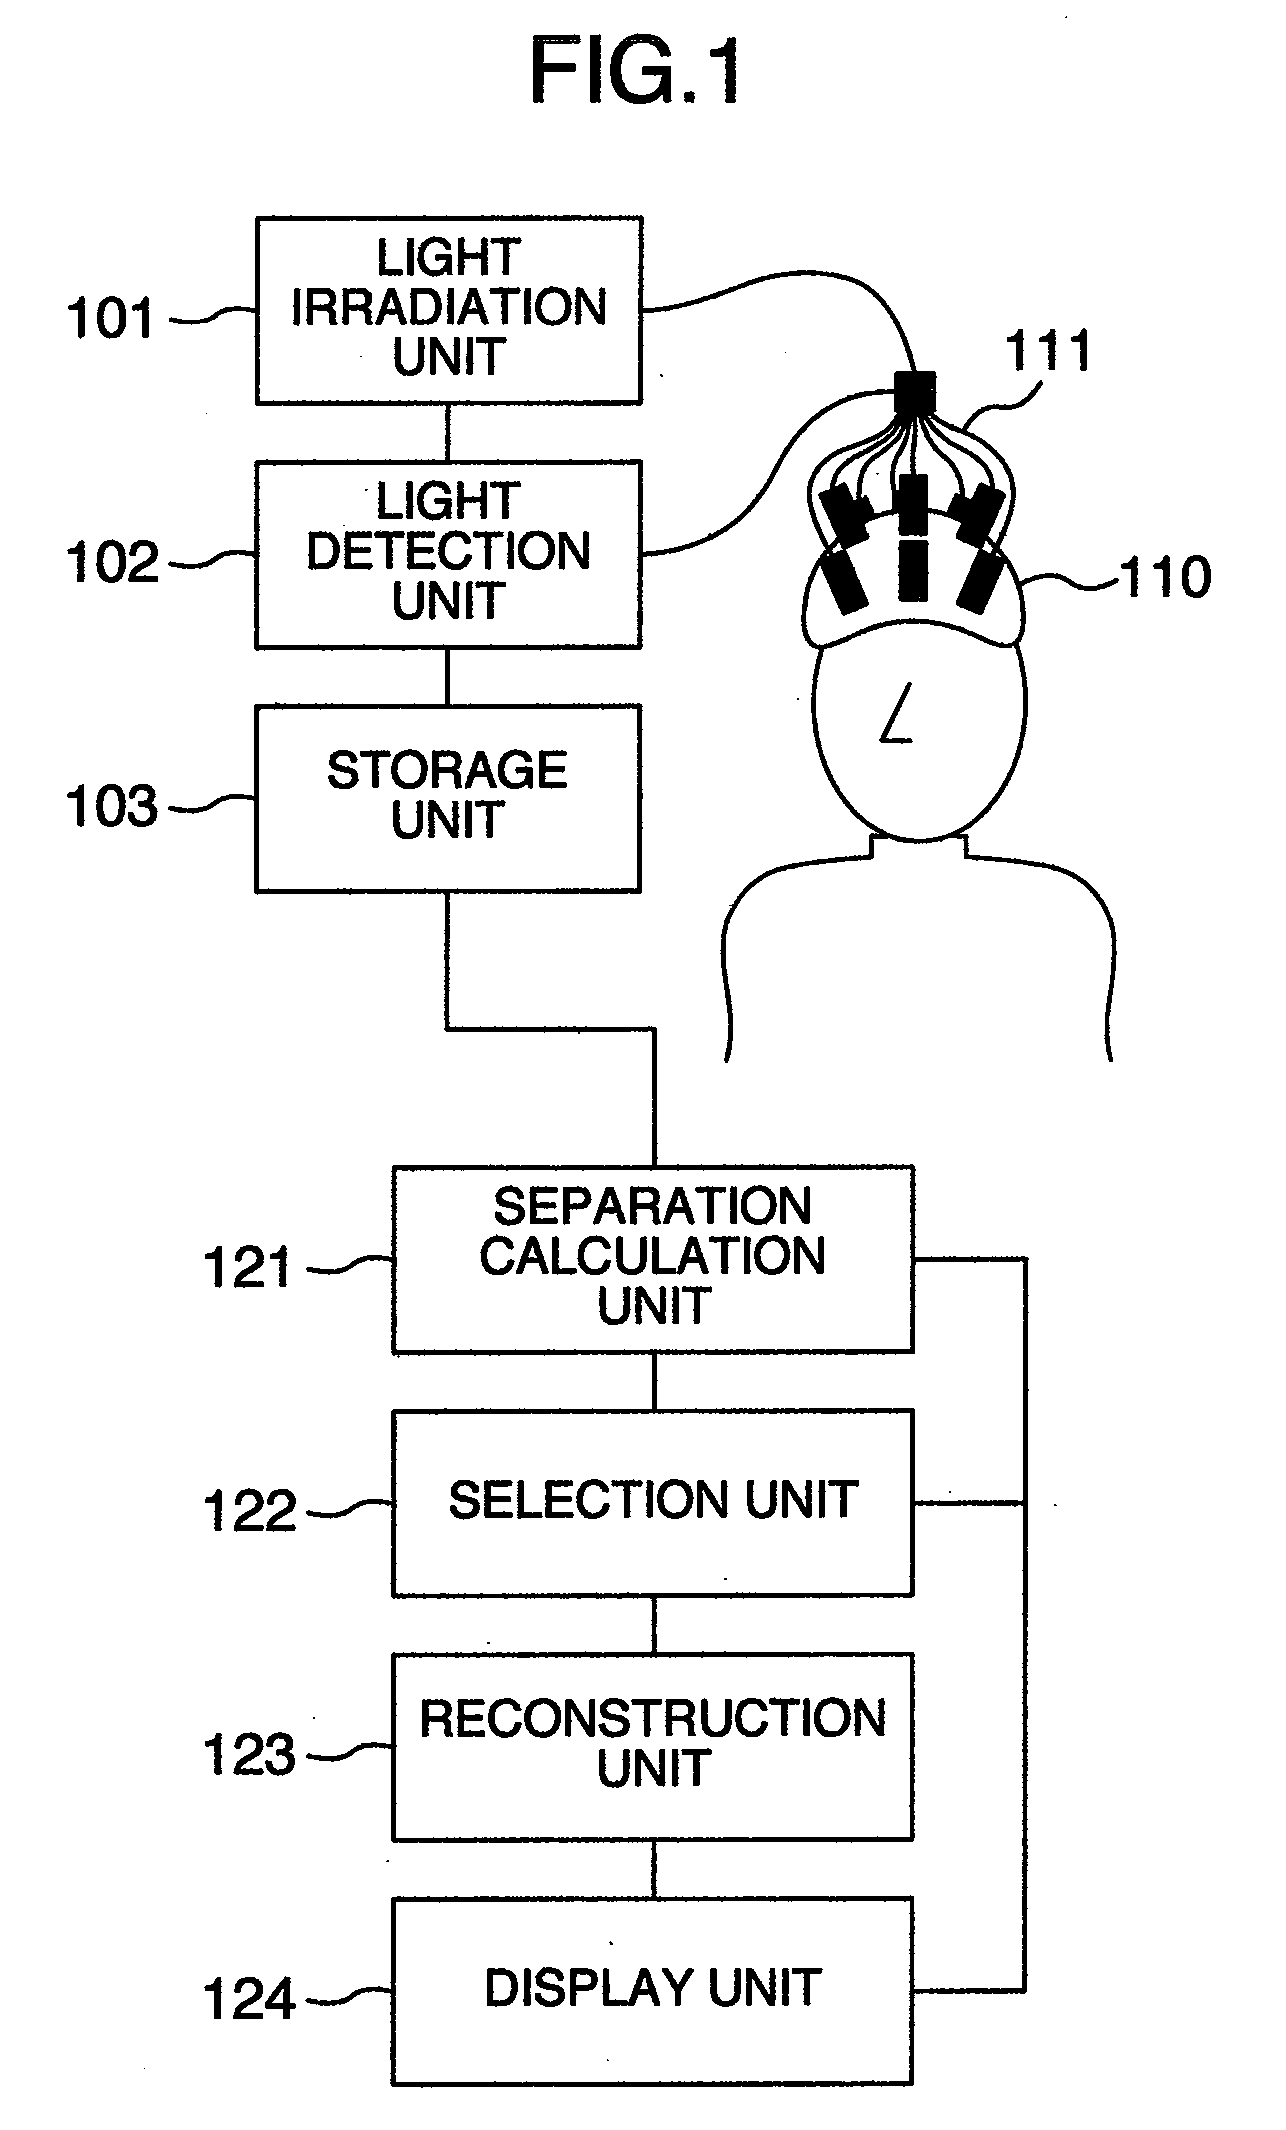 Optical measurement instrument for living body